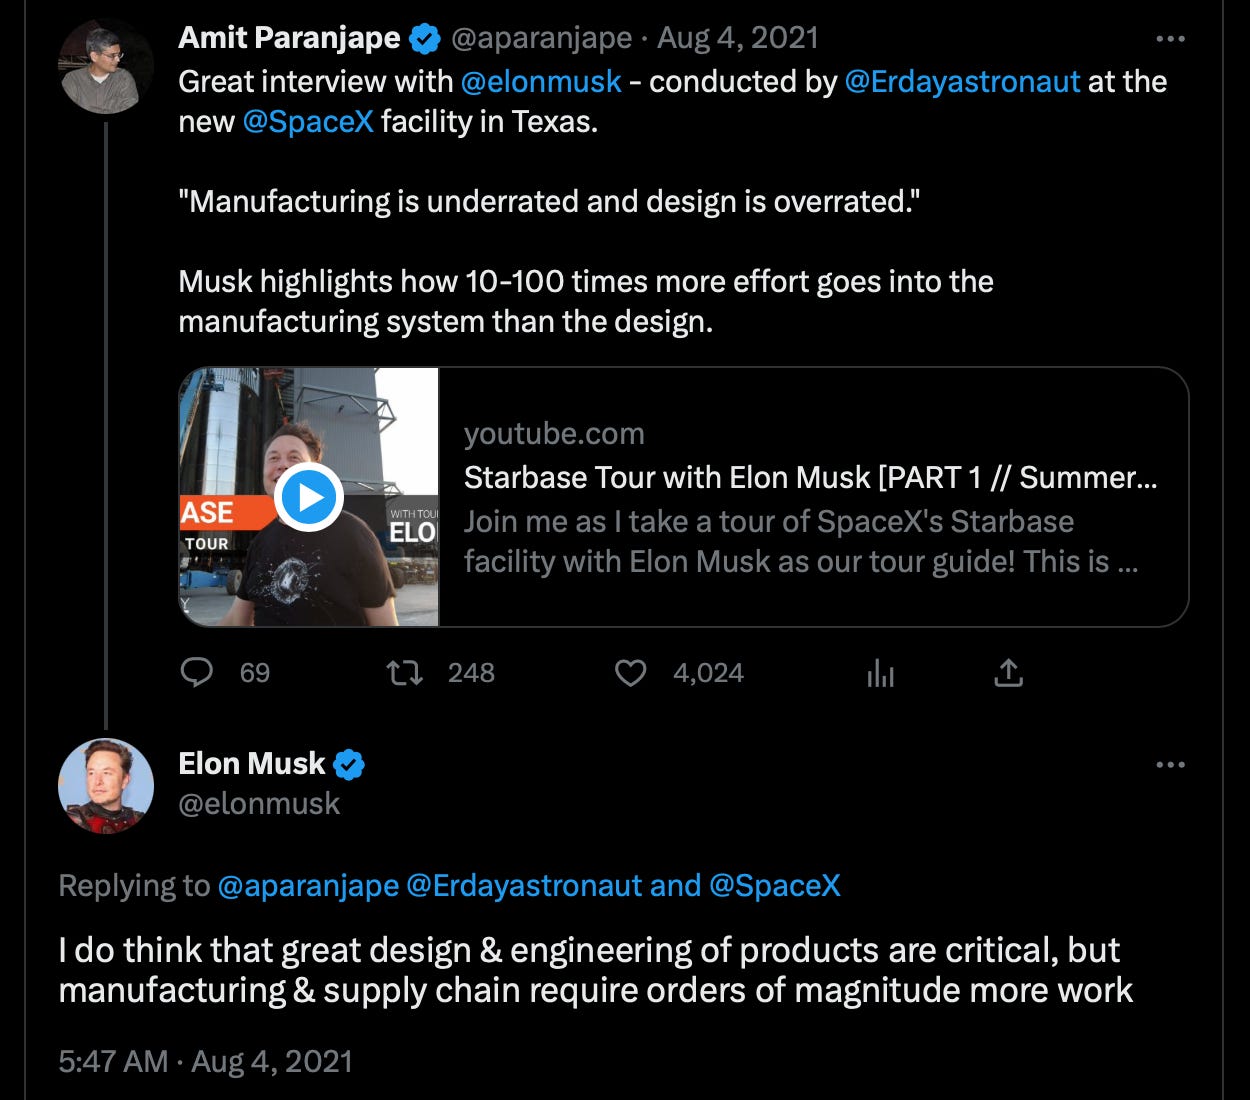 Elon Musk saying on Twitter "I do think that great design & engineering of products are critical, but manufacturing & supply chain require orders of magnitude more work